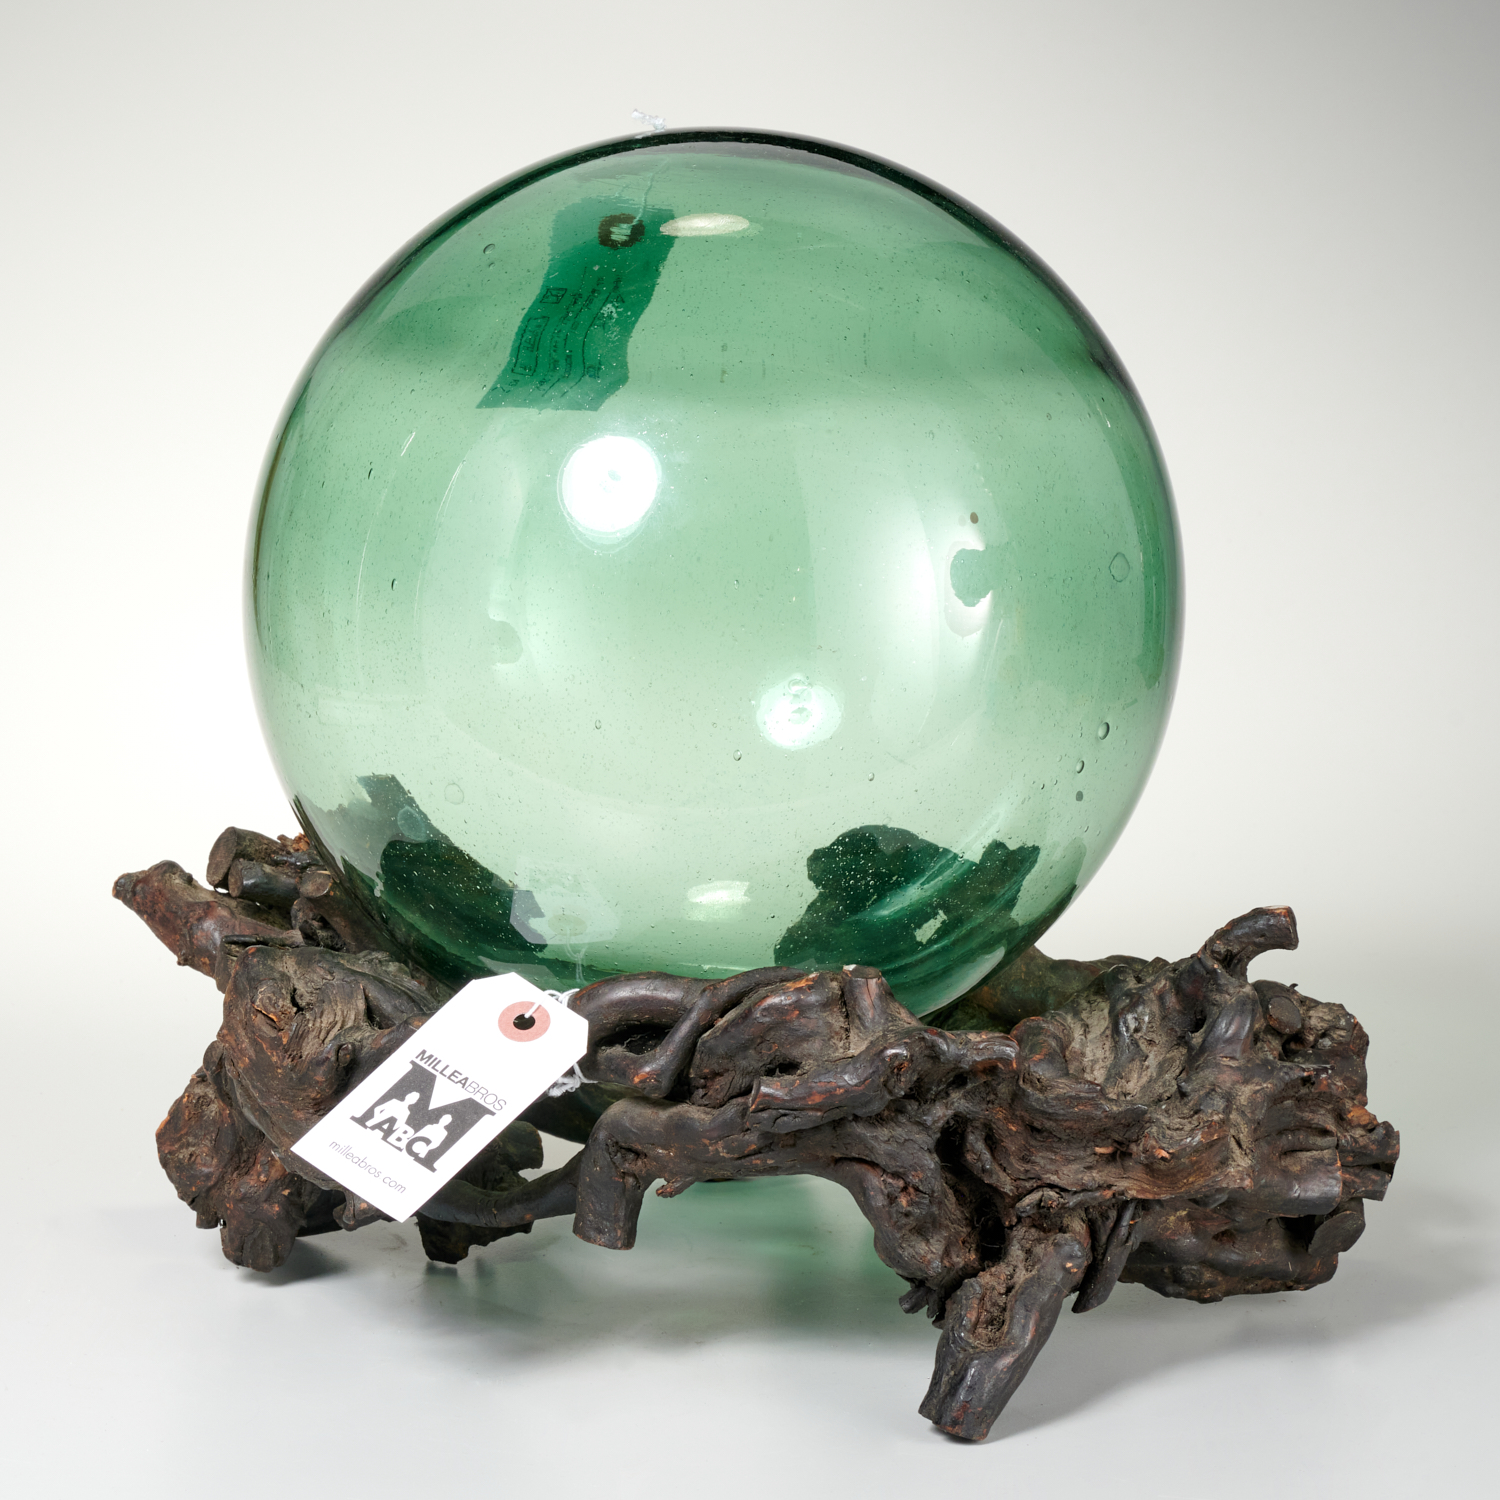 GREEN GLASS WITCH BALL ON TREE ROOT 2ce674